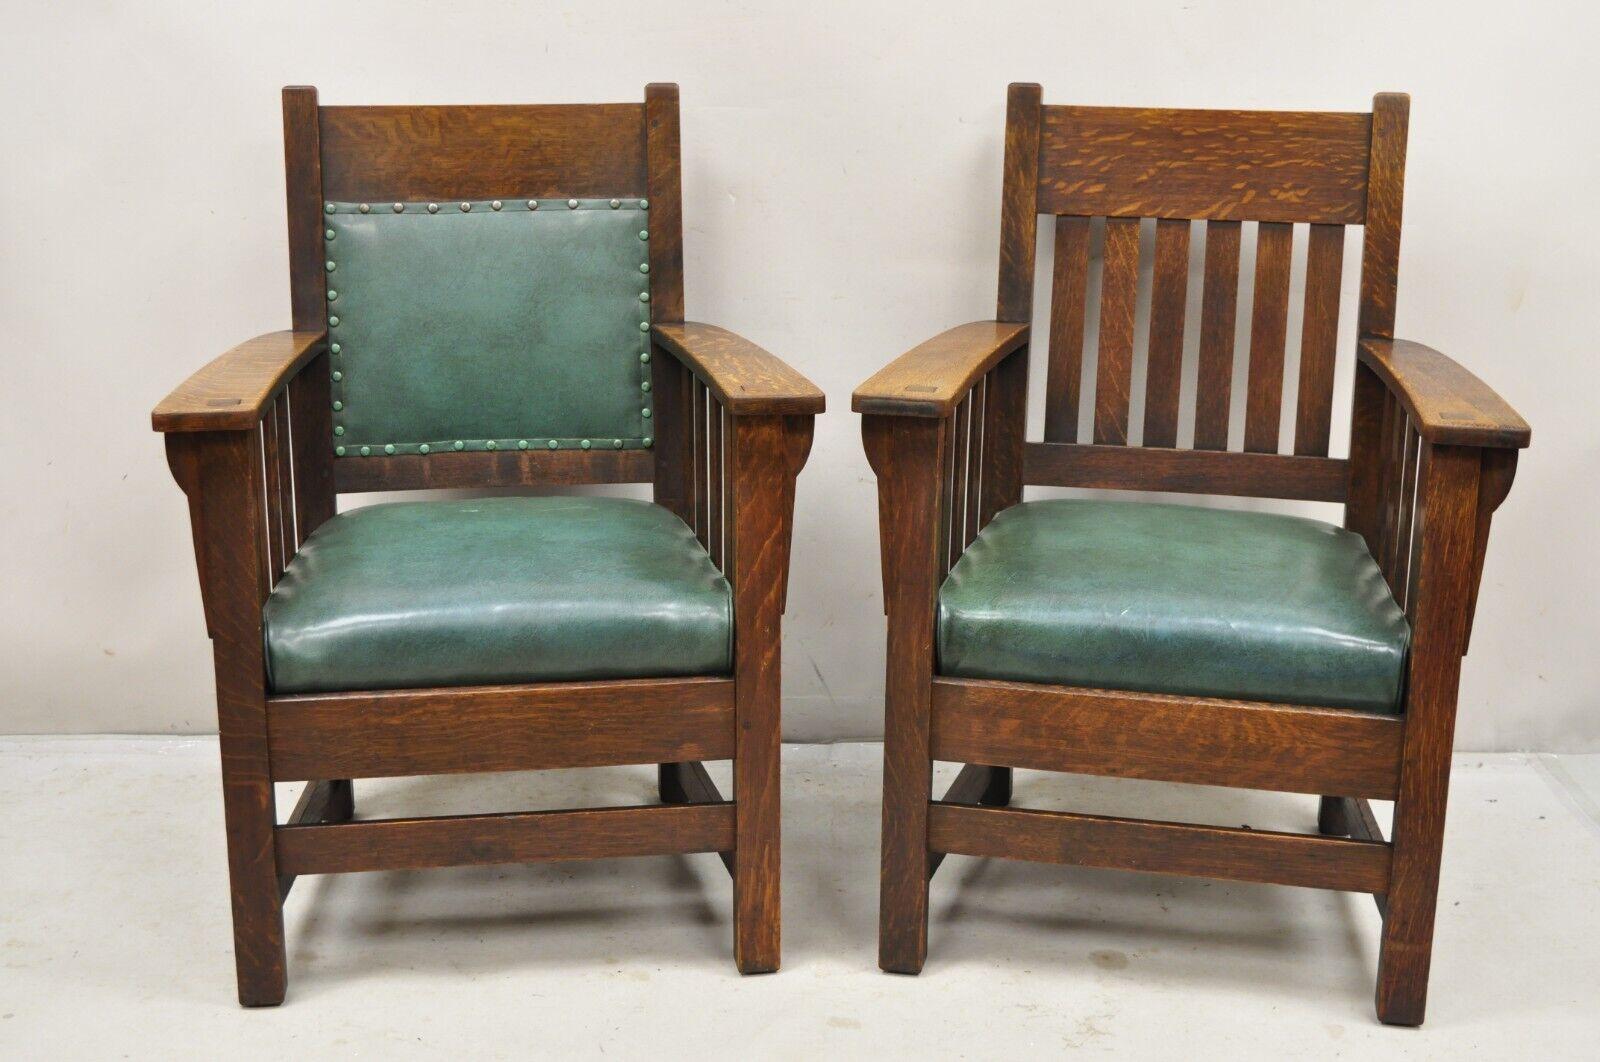 Antique Mission Oak Arts & Crafts Stickley JM Young Style Lounge Arm Chairs Green - Pair. Item features mortise and tenon joints, beautiful quartersawn oak wood, original green Naugahyde spring cushion, very nice antique pair. Possibly by Stickley /